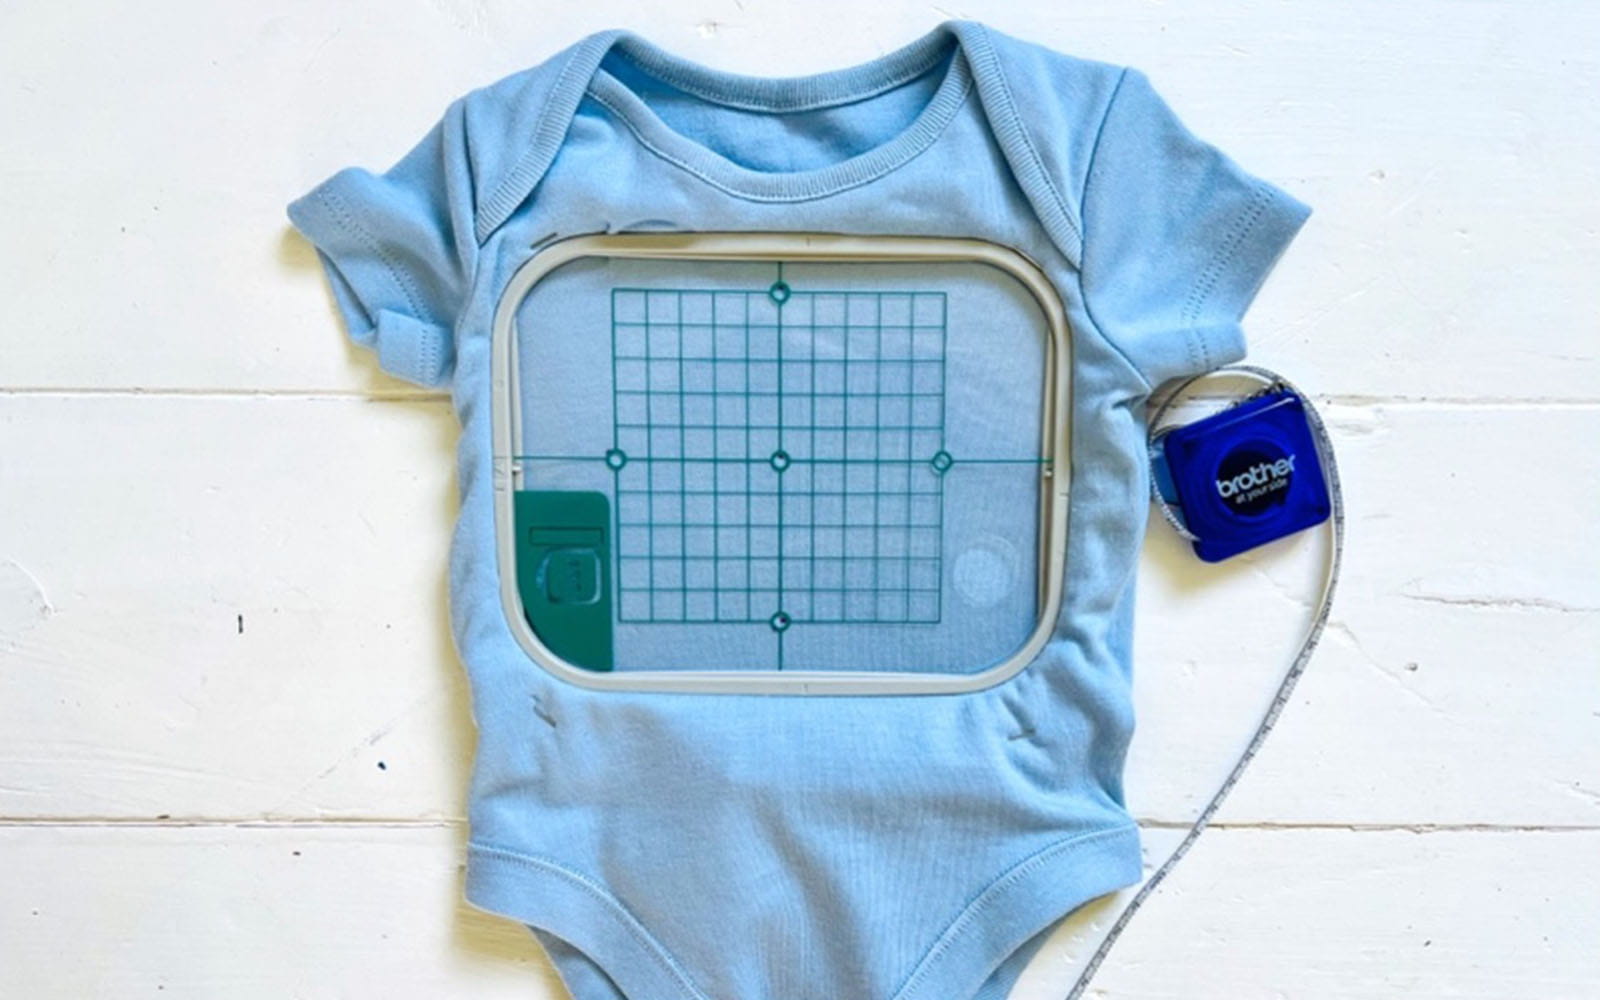 Blue babygrow hooped into Brother machine embroidery hoop